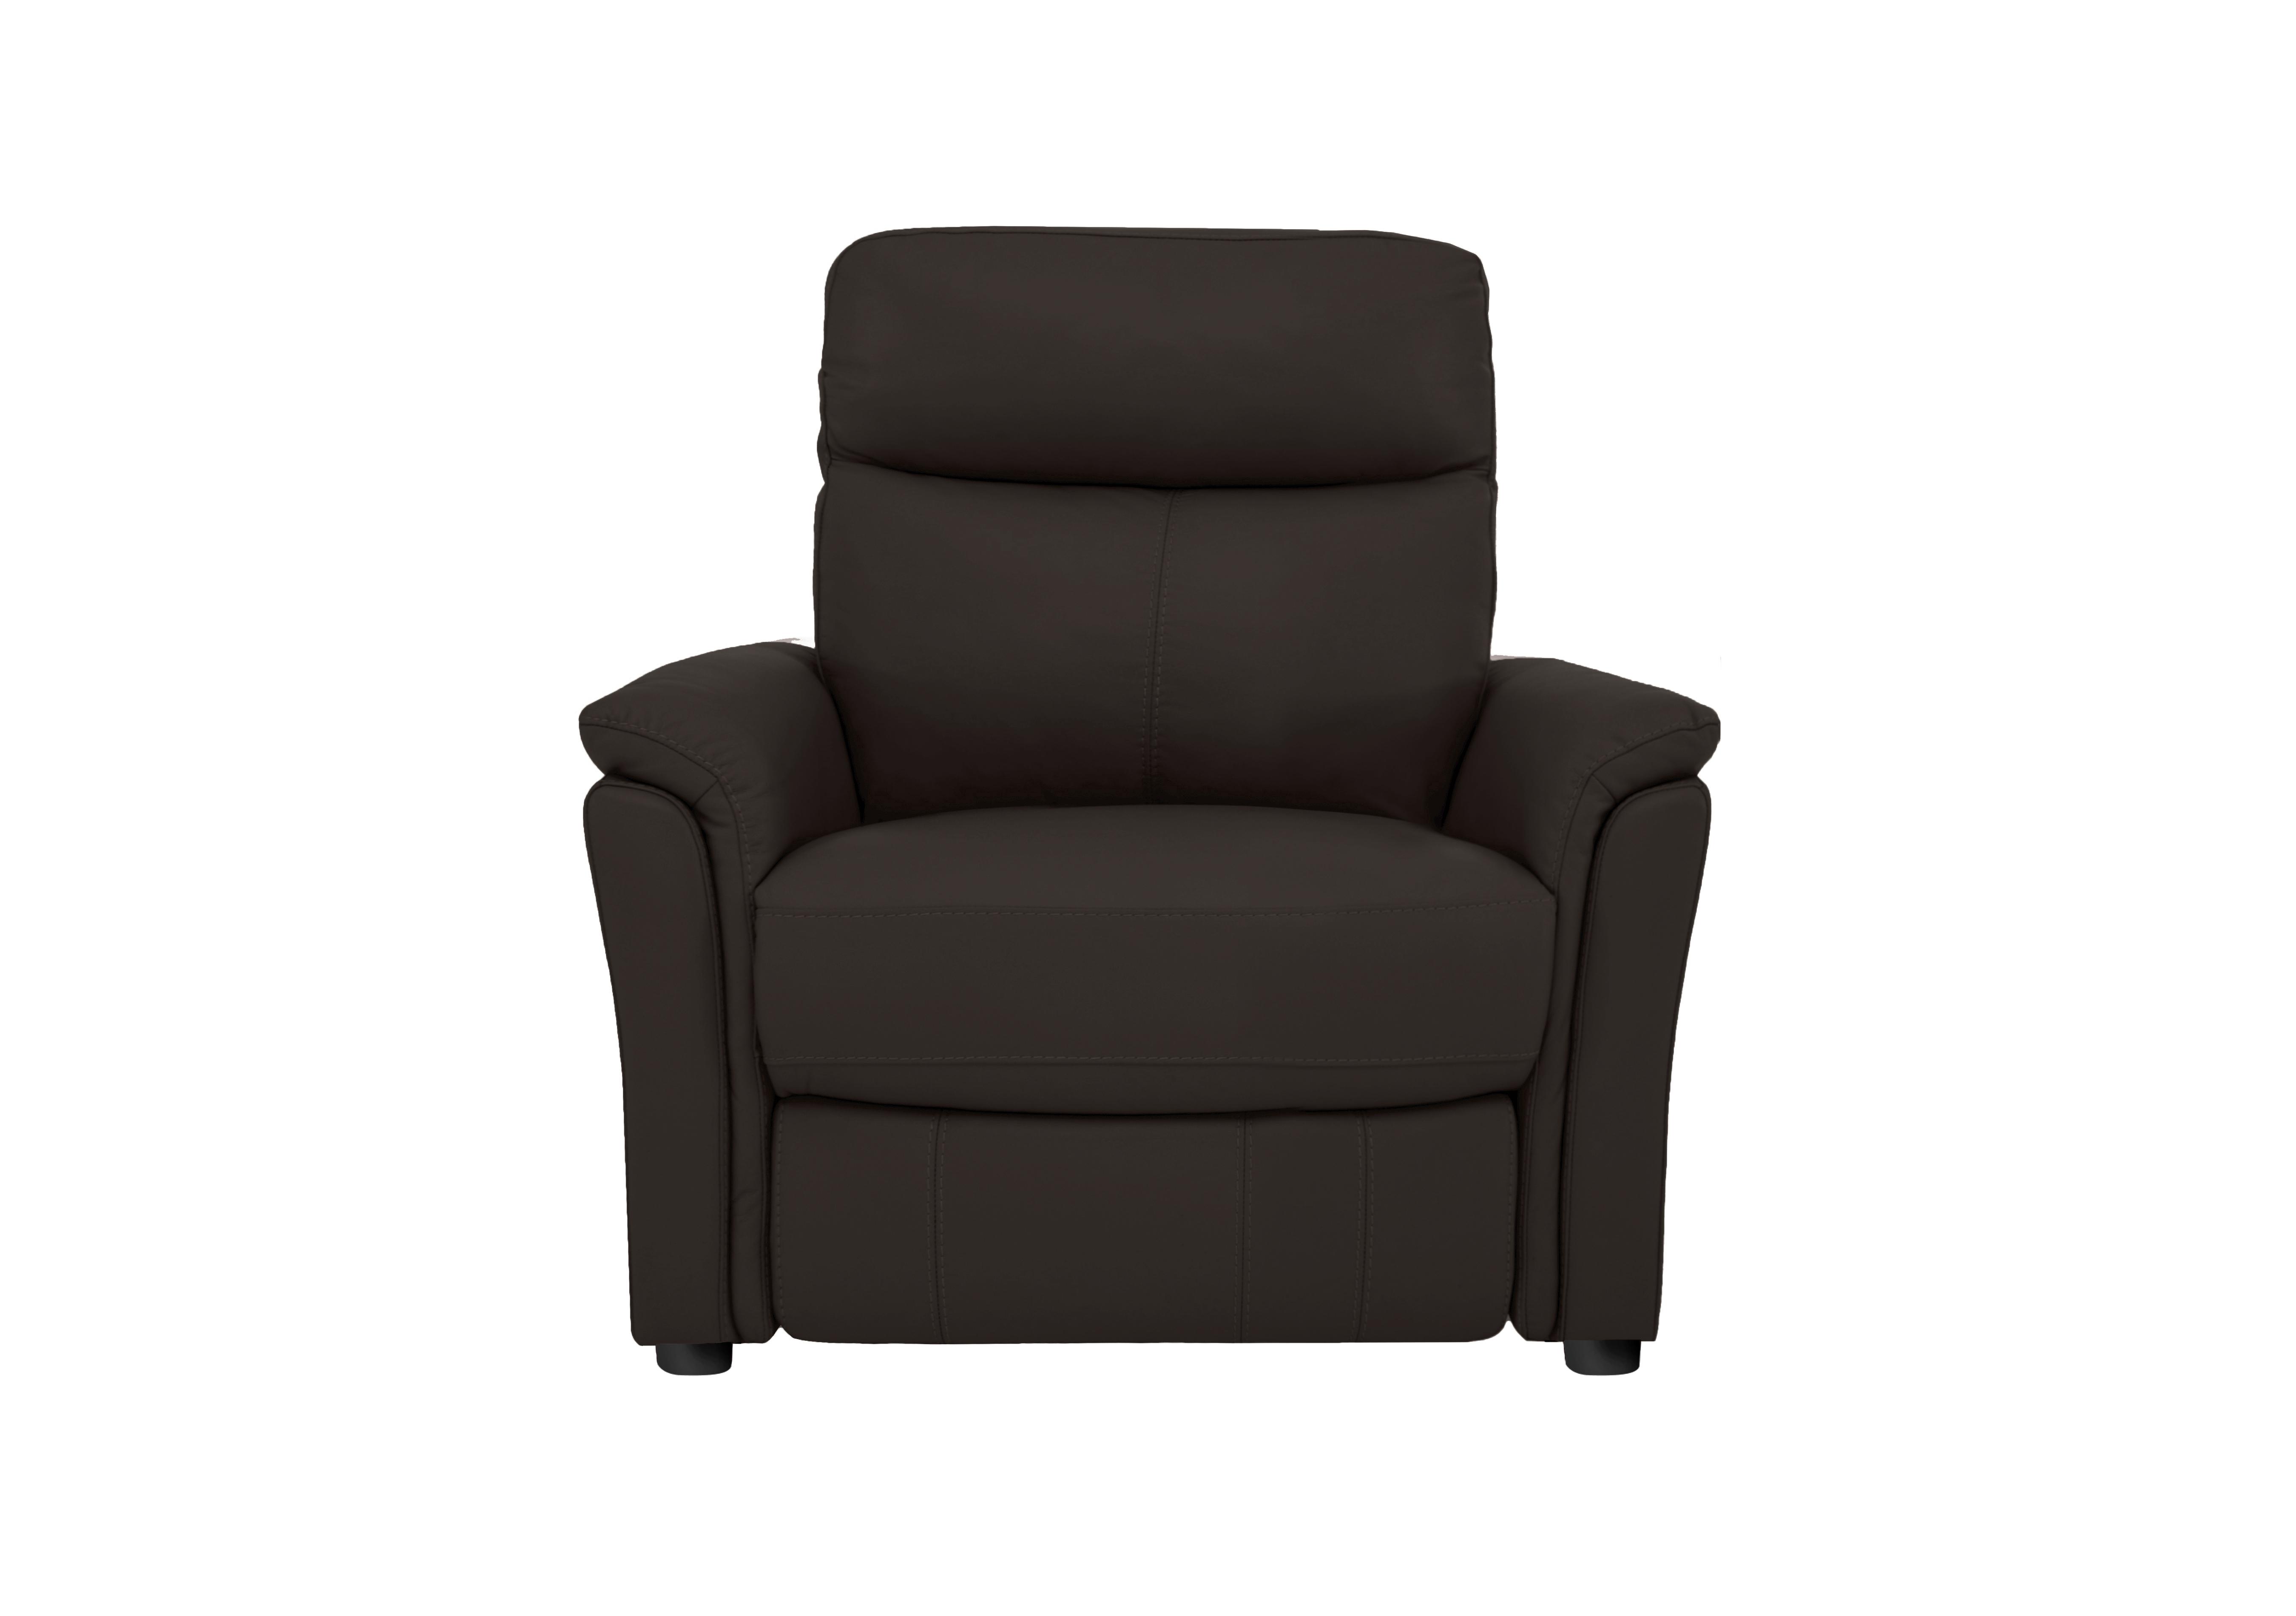 Compact Collection Piccolo Leather Static Armchair in Bv-1748 Dark Chocolate on Furniture Village